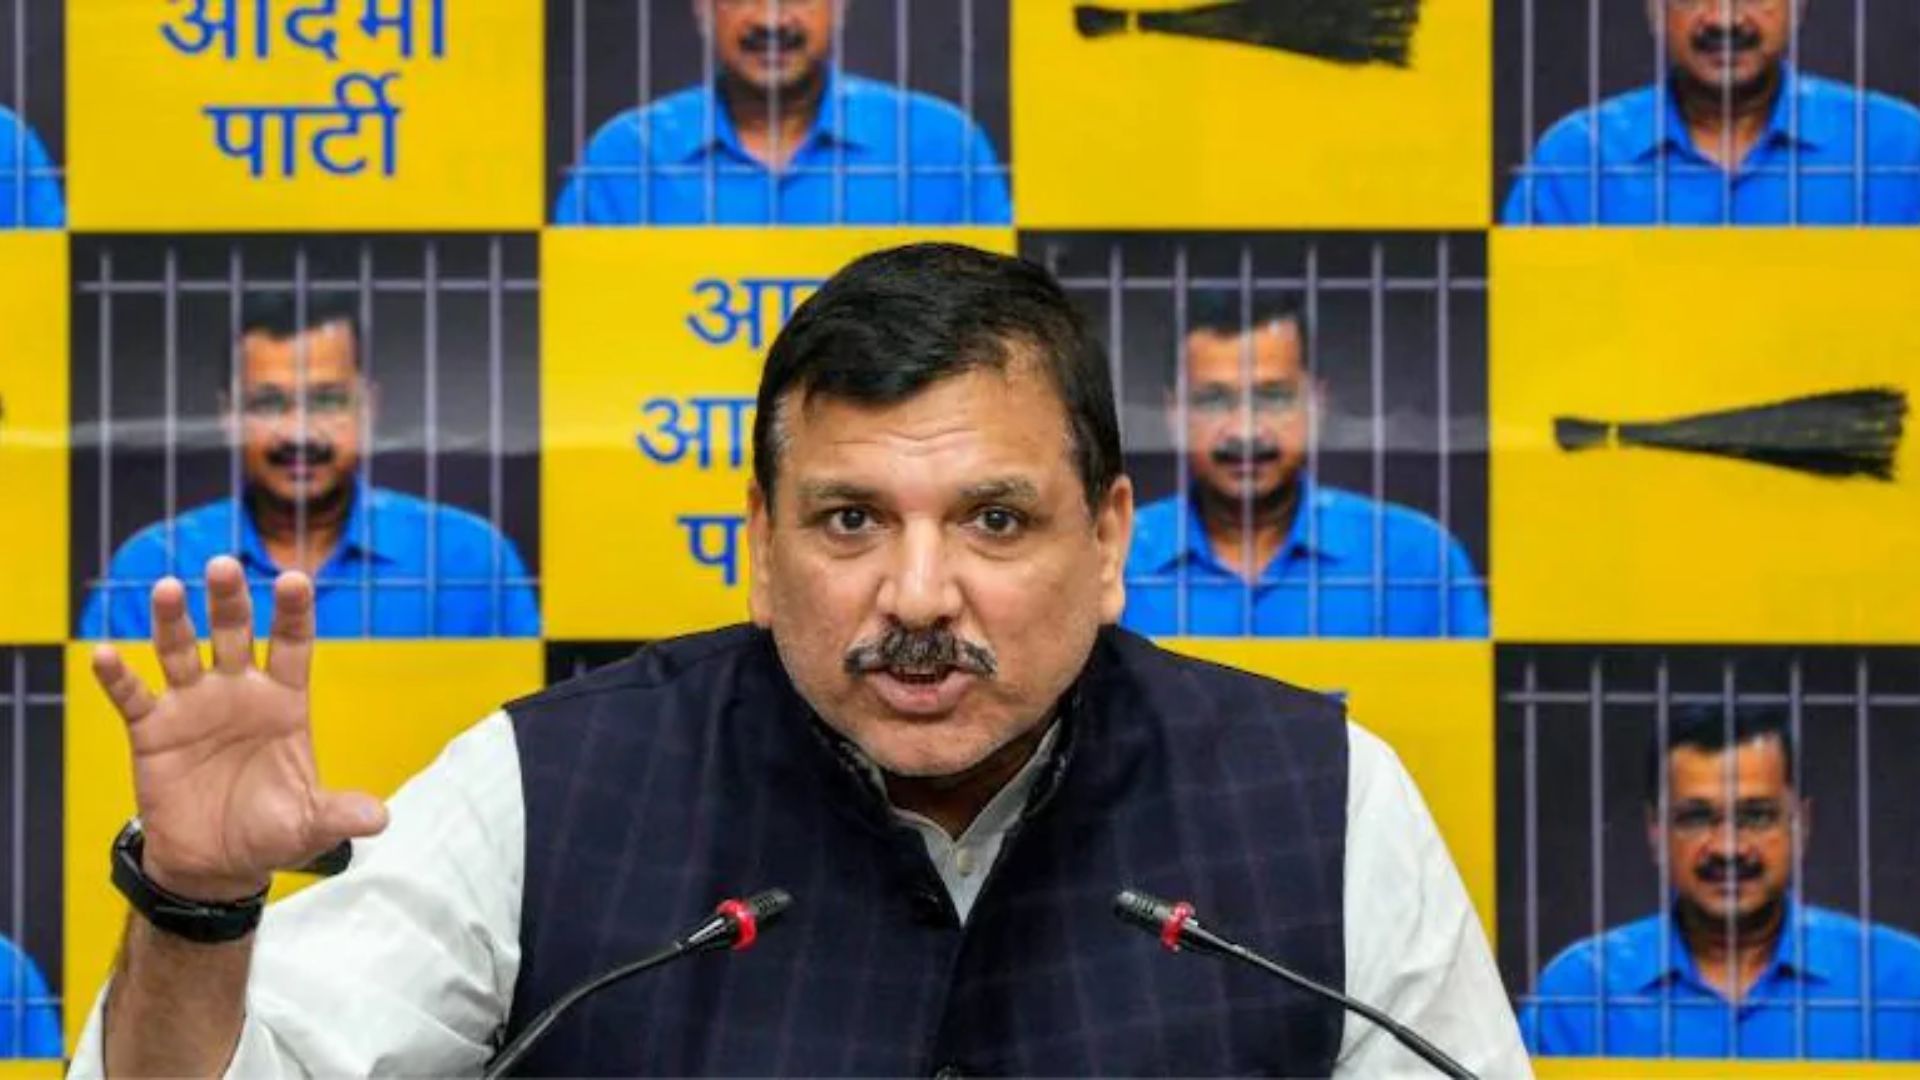 AAP’s Sanjay Singh Accuses PM Modi of Orchestrating THIS Scam